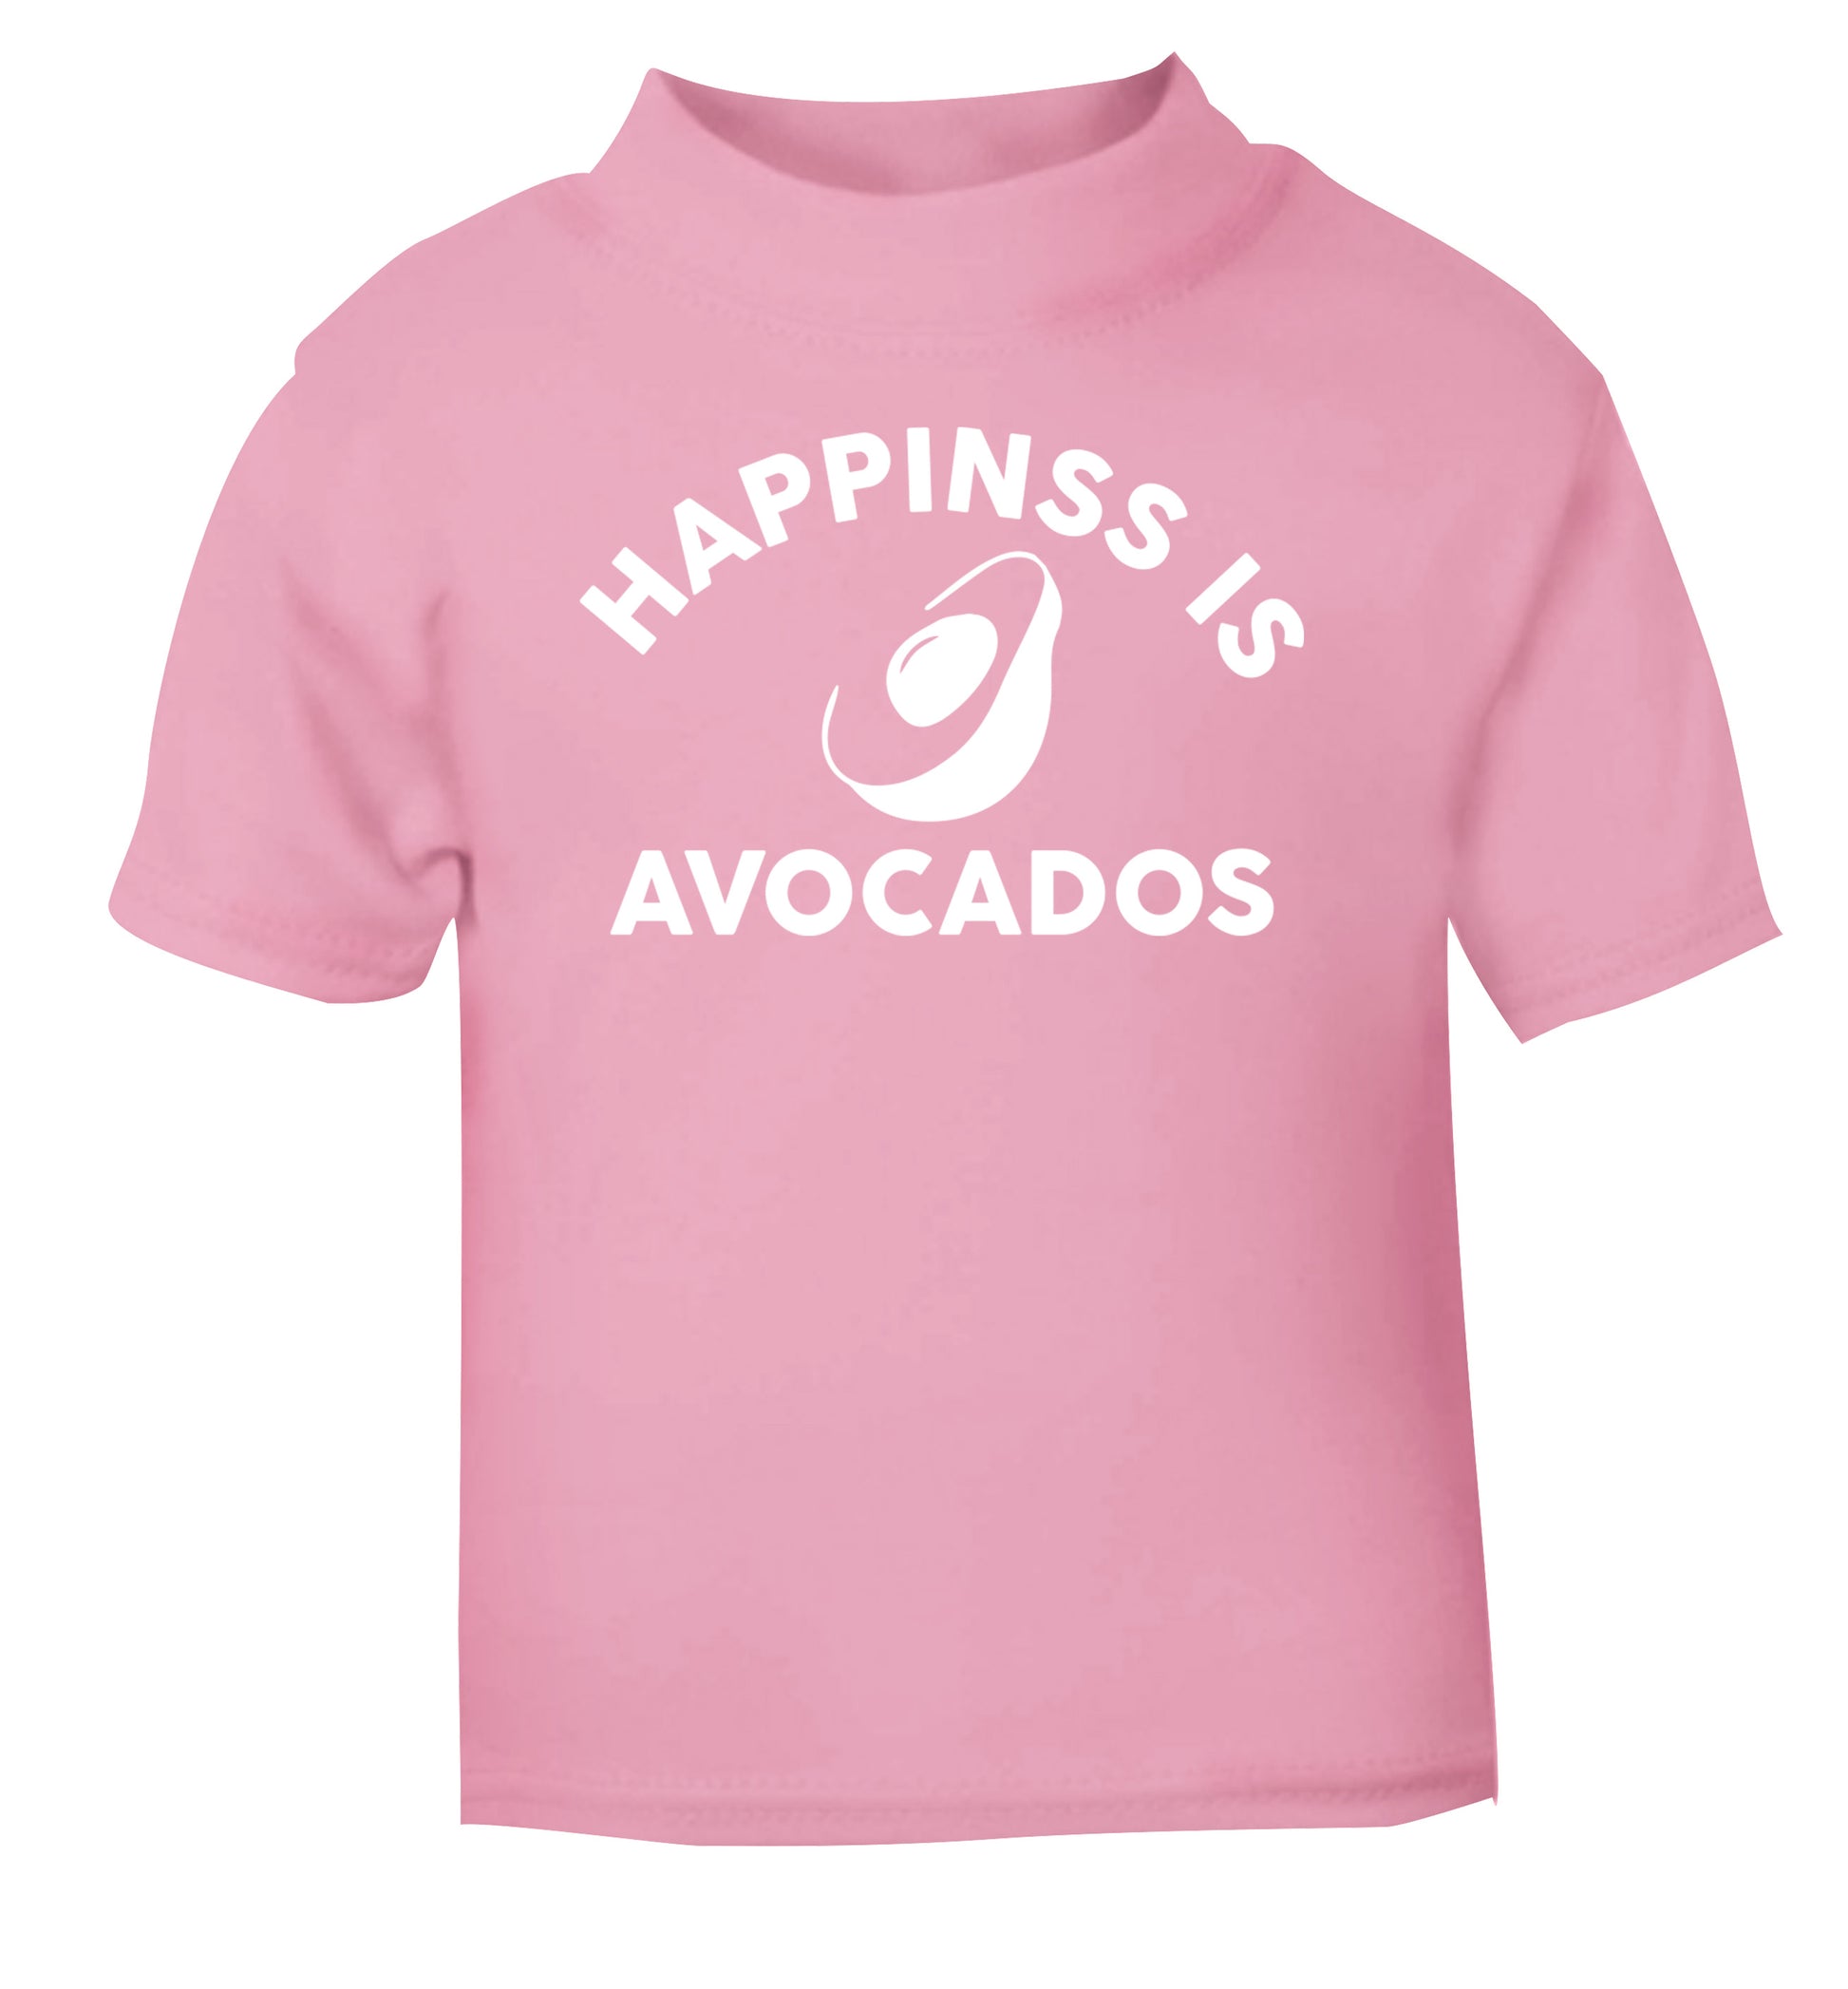 Happiness is avocados light pink Baby Toddler Tshirt 2 Years